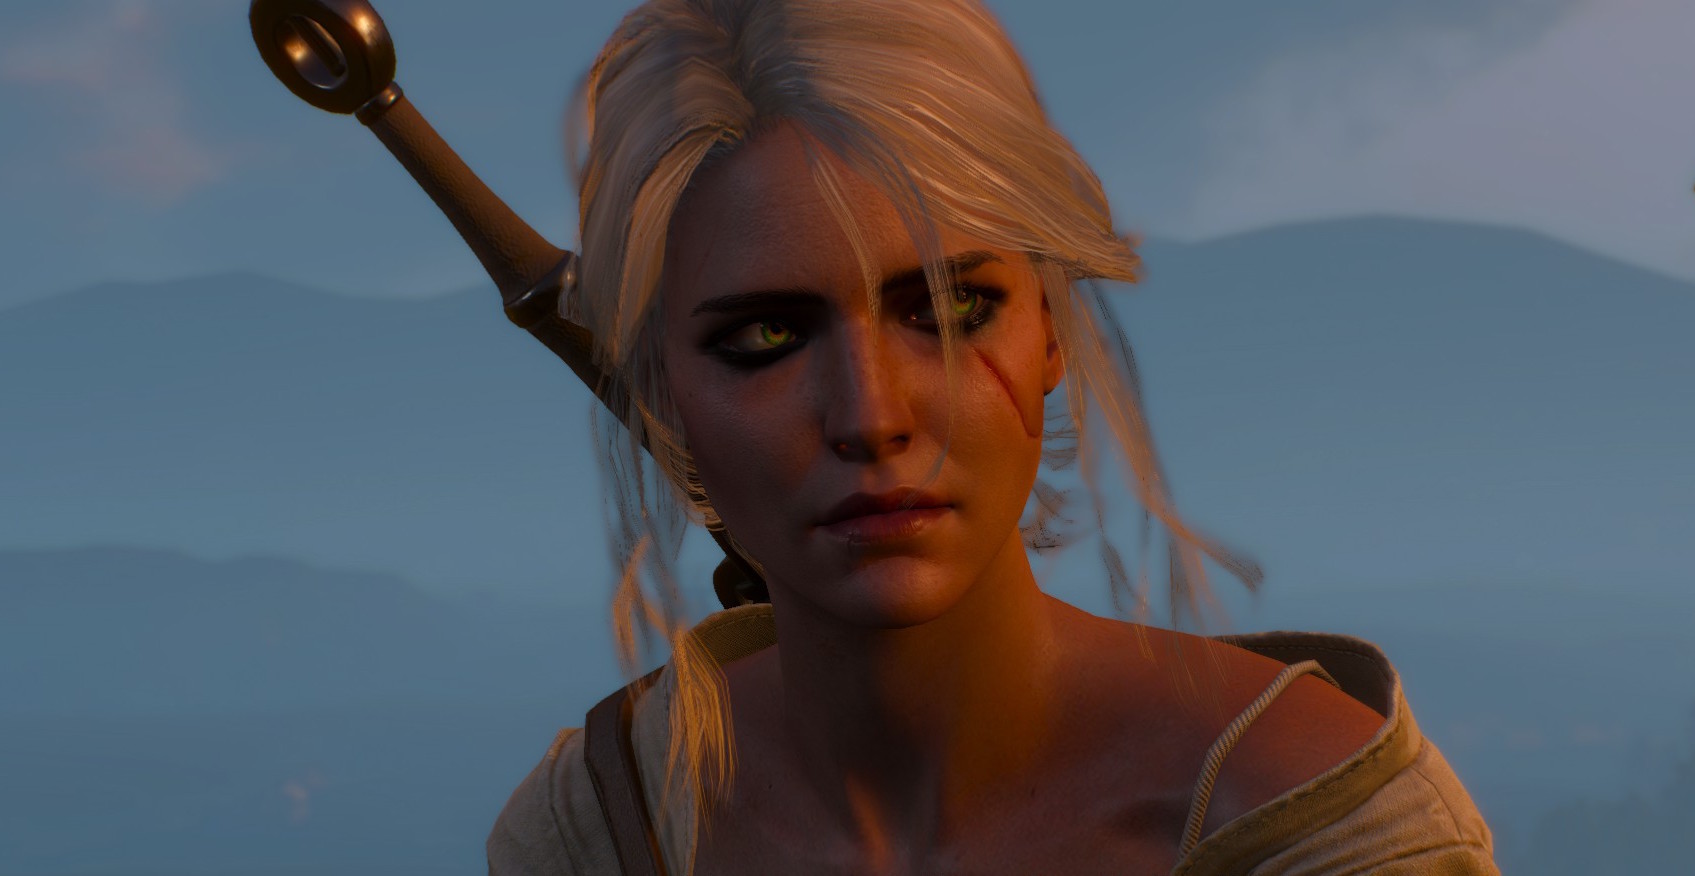 The Witcher Season 3: Making Ciri the Focal Point Was a Mistake